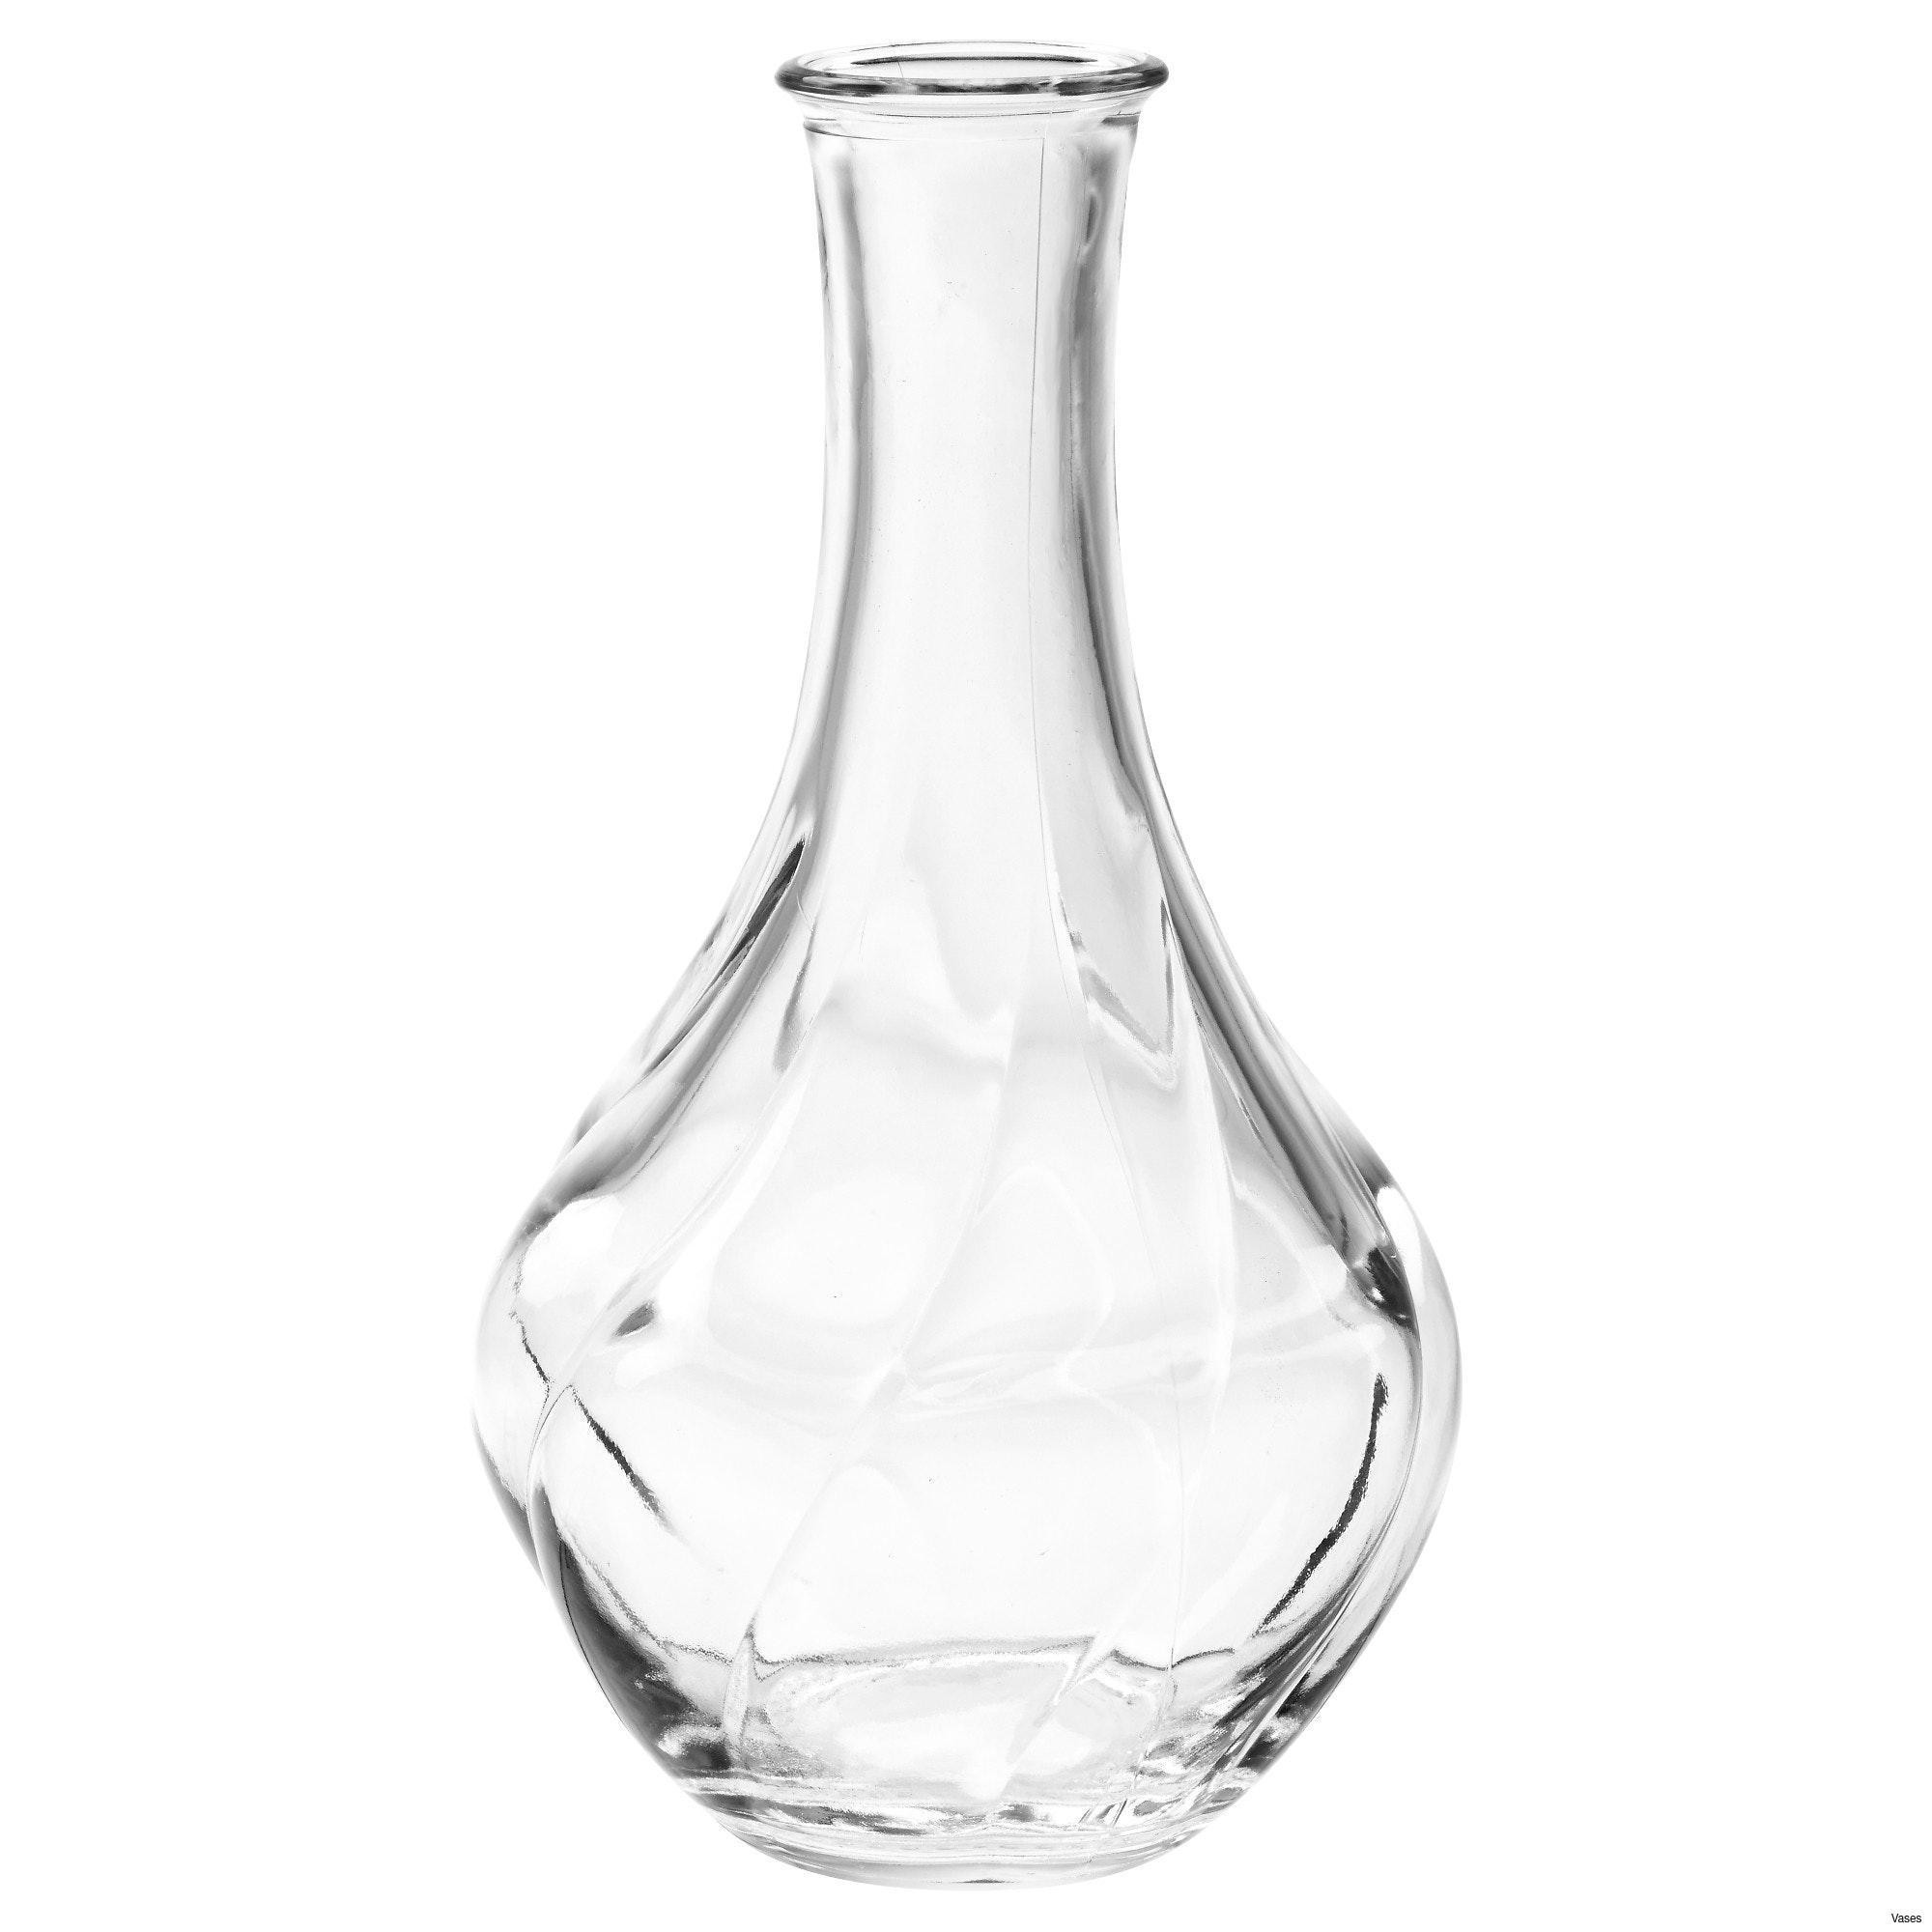 27 Ideal 40 Inch Vases 2024 free download 40 inch vases of large white vases photos living room glass vases fresh clear vase 0d with regard to large white vases photos living room glass vases fresh clear vase 0d tags amazing and of